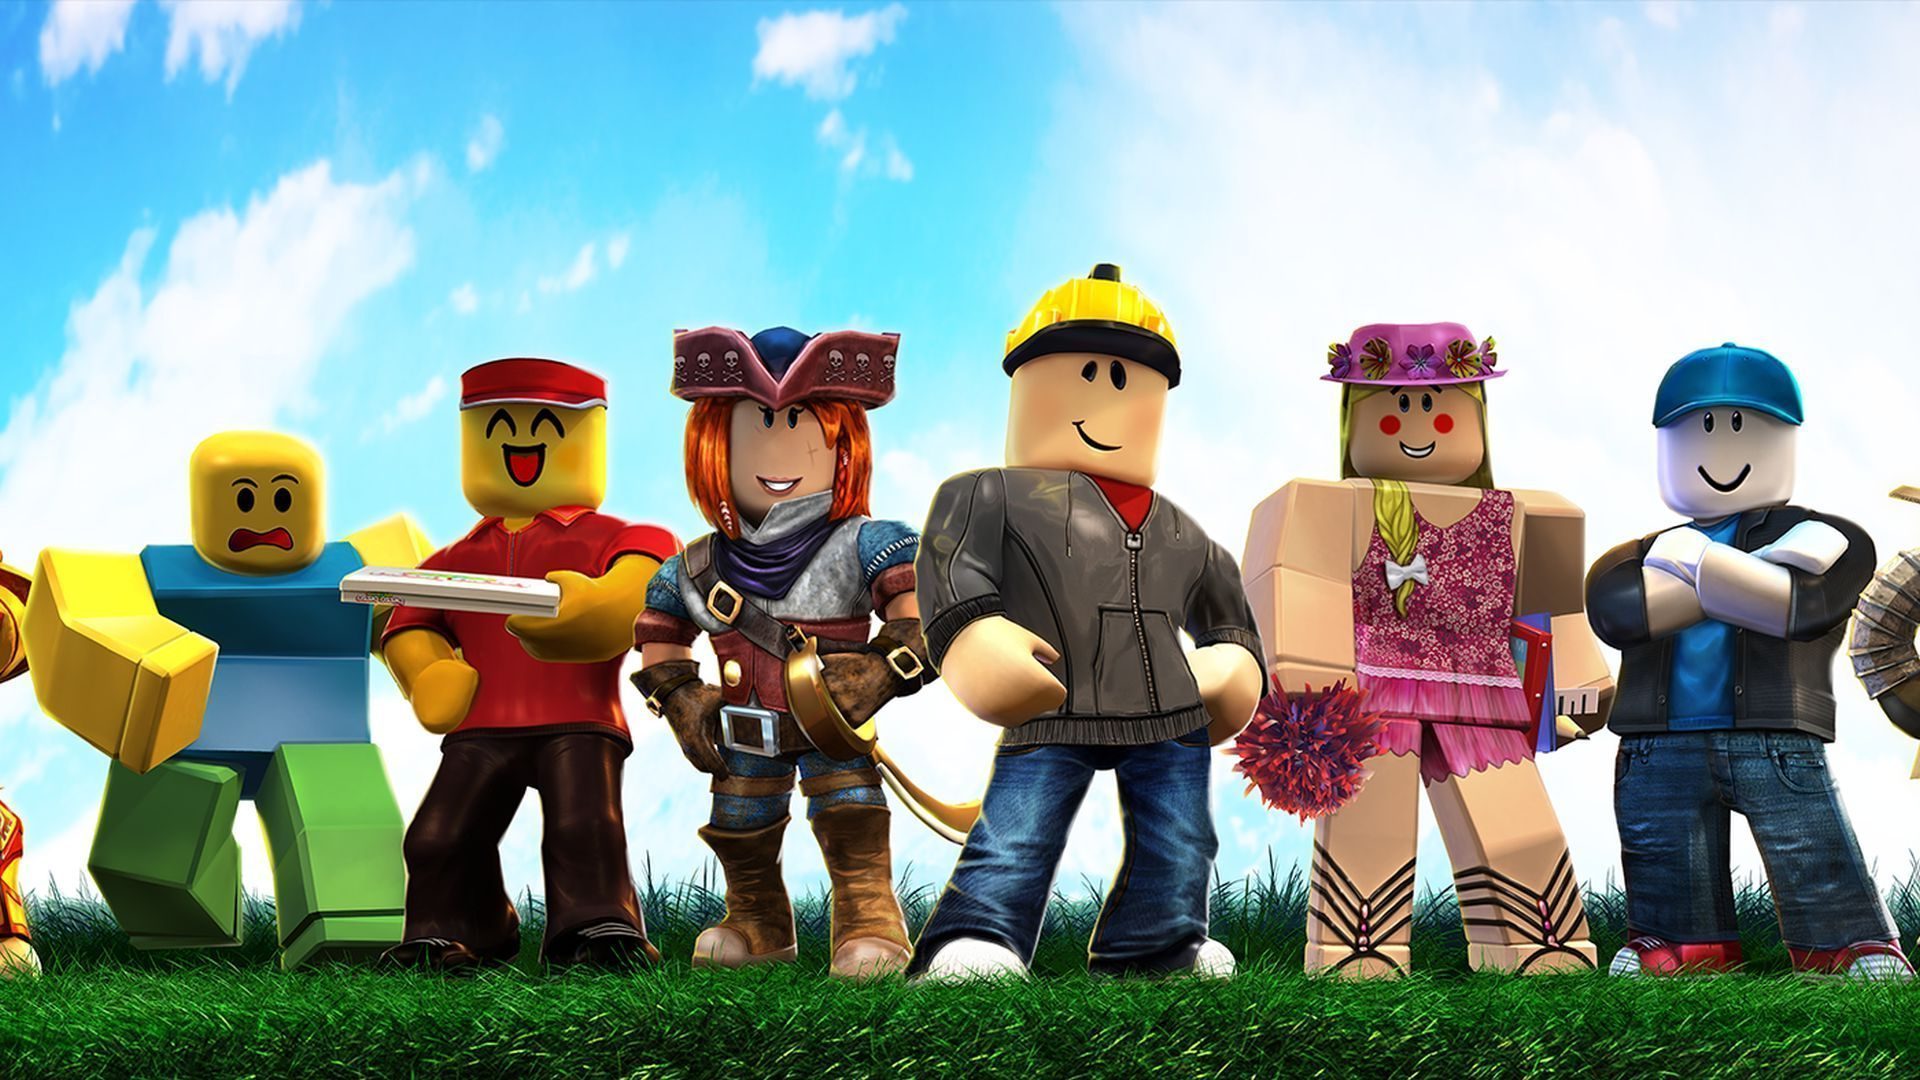 Roblox copyright suit against lookalike dolls survives dismissal bid   Courthouse News Service